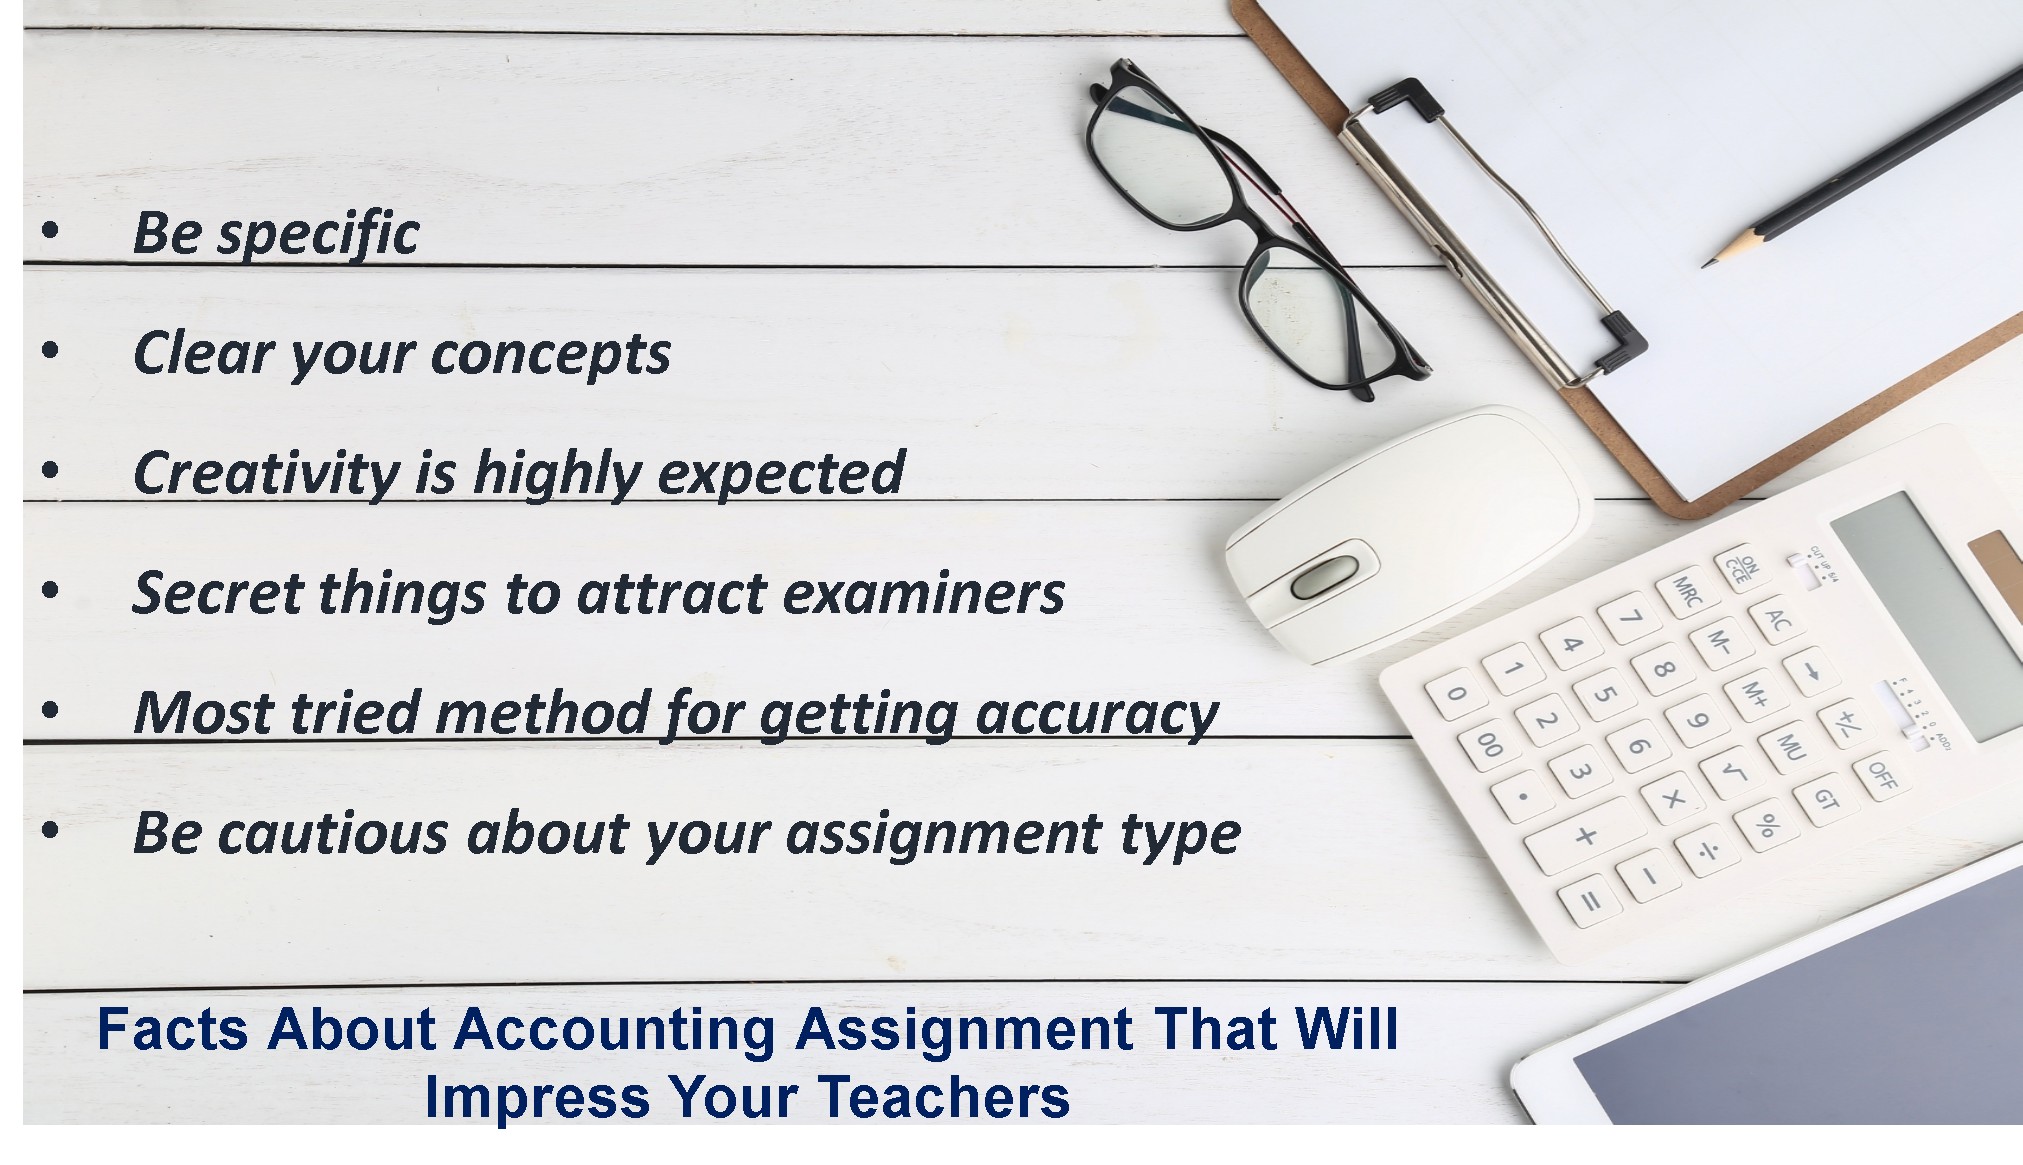 Facts about Accounting Assignment that will impress your Teachers